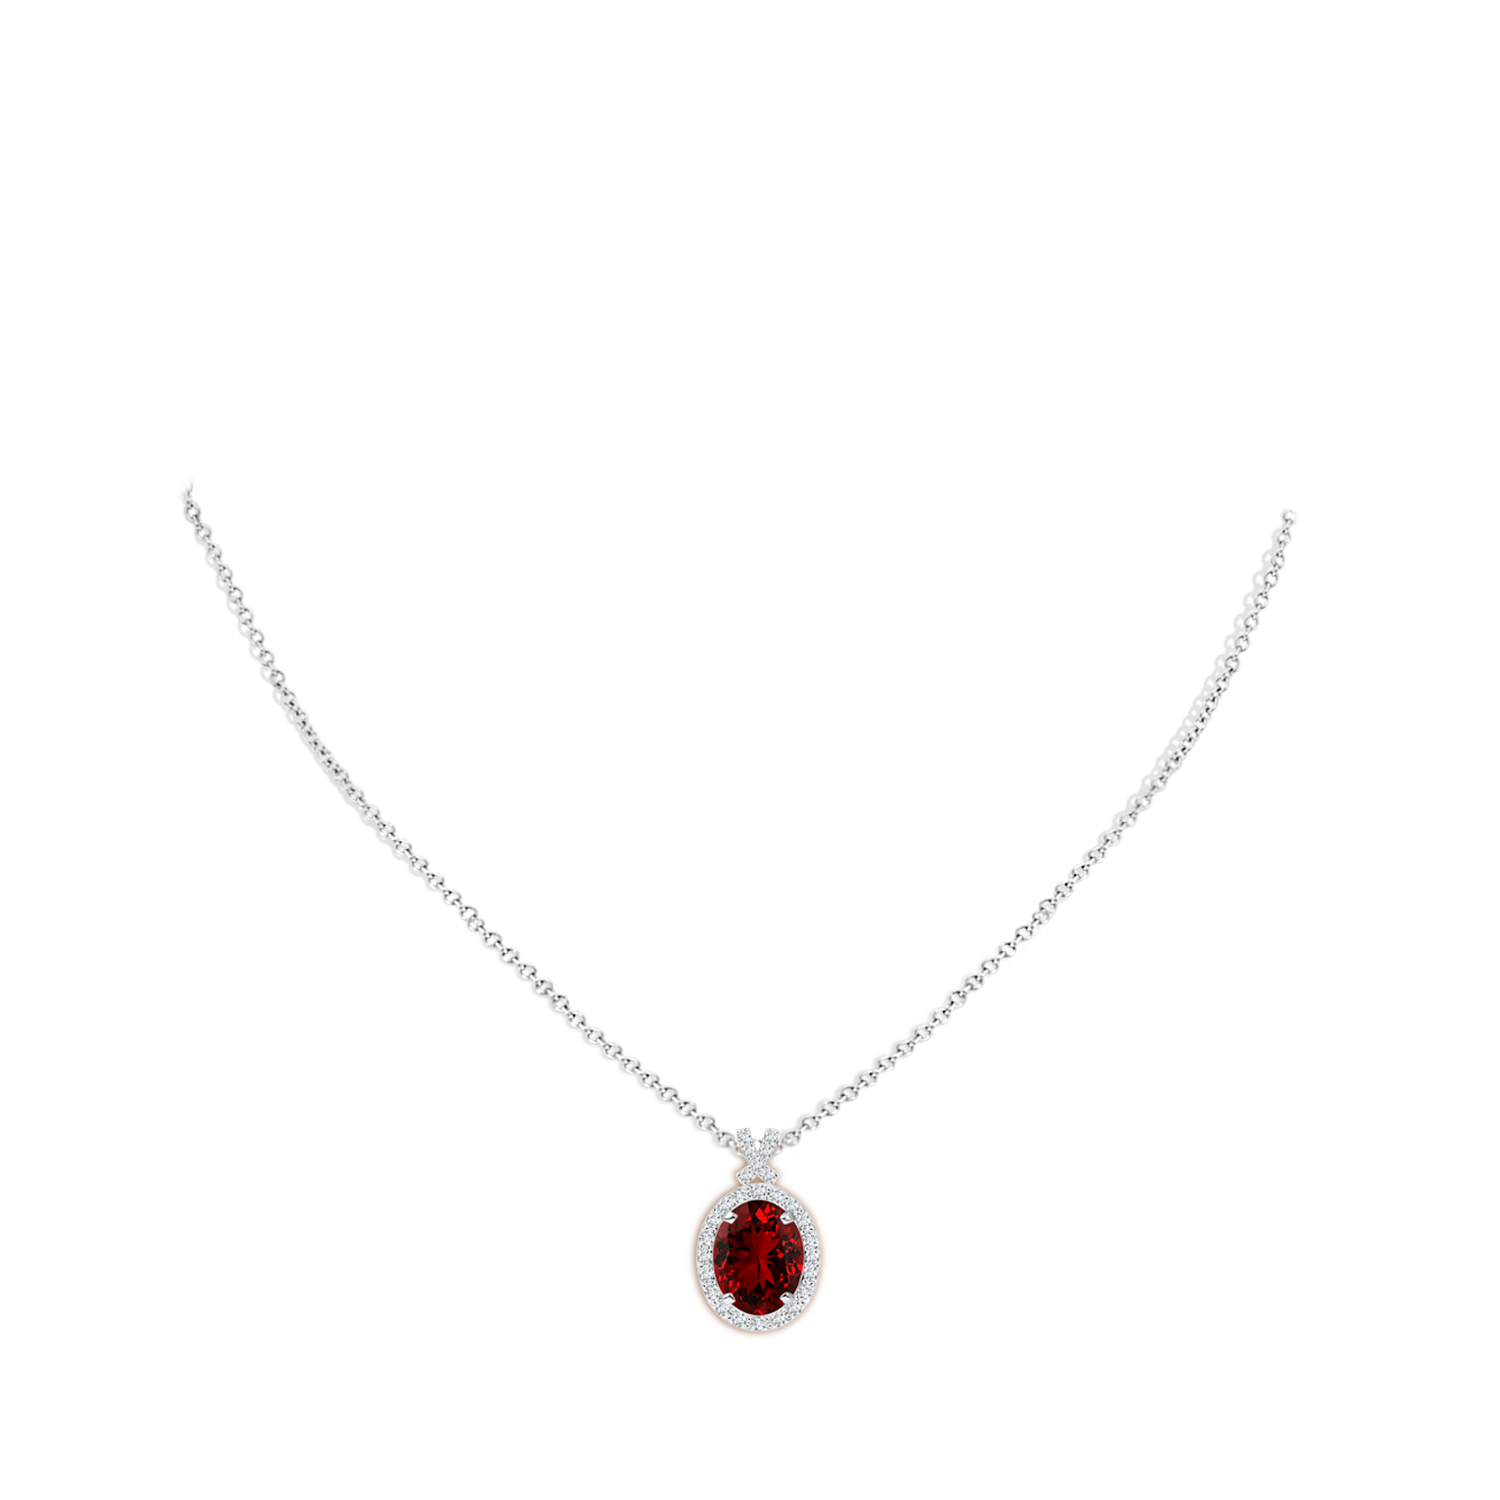 Huge Lab Ruby Pendant Necklace Sterling Silver Artisan Handcrafted | eBay